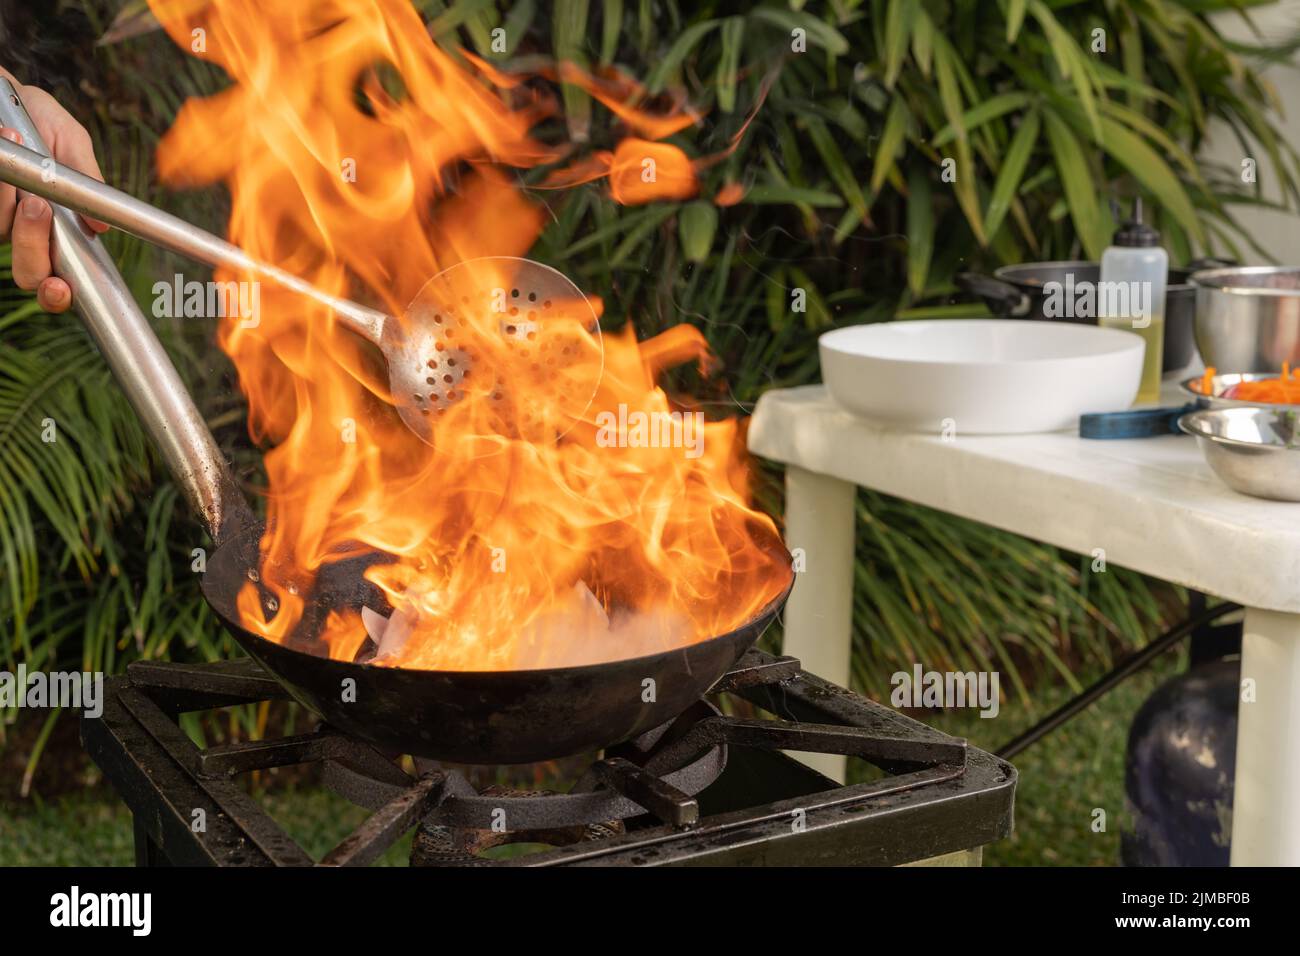 Person cooking with a pan and a portable stove in a garden Stock Photo